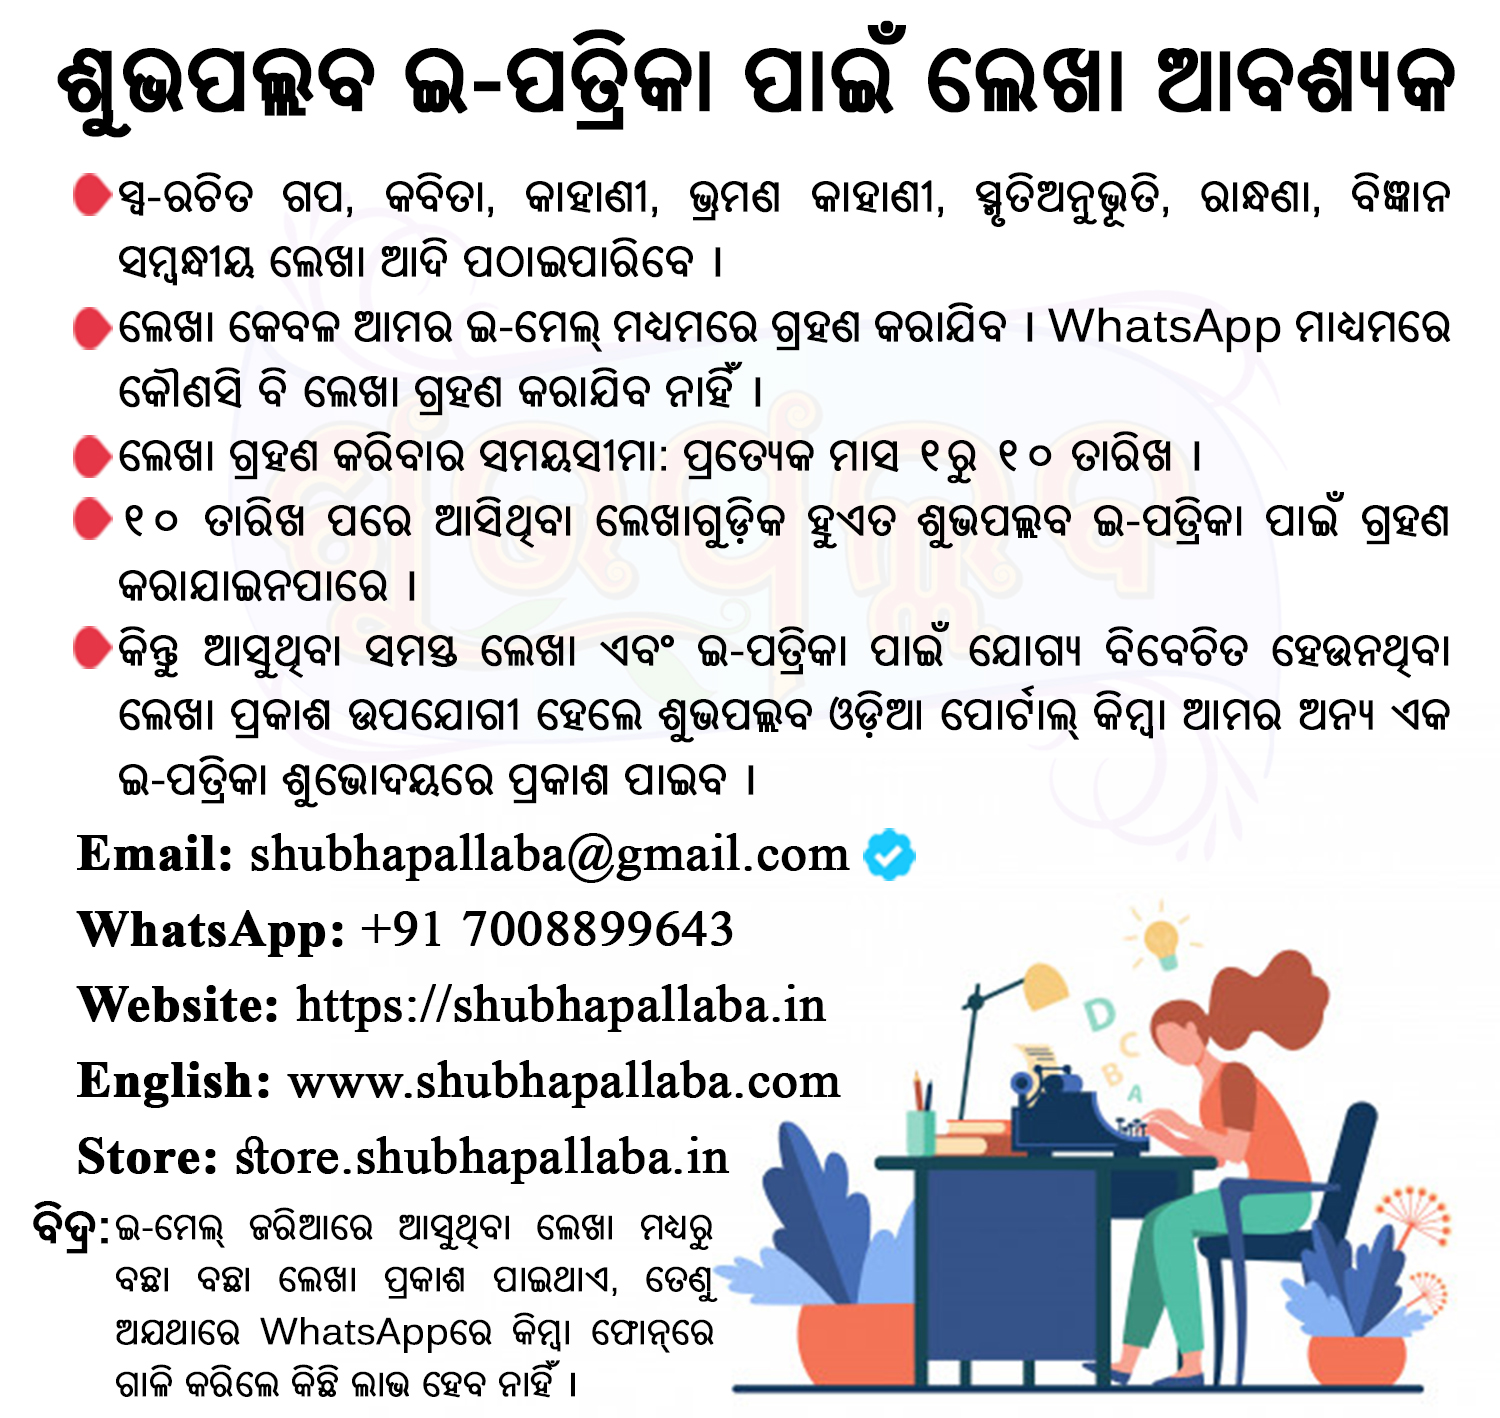 Article Collection for Shubhapallaba